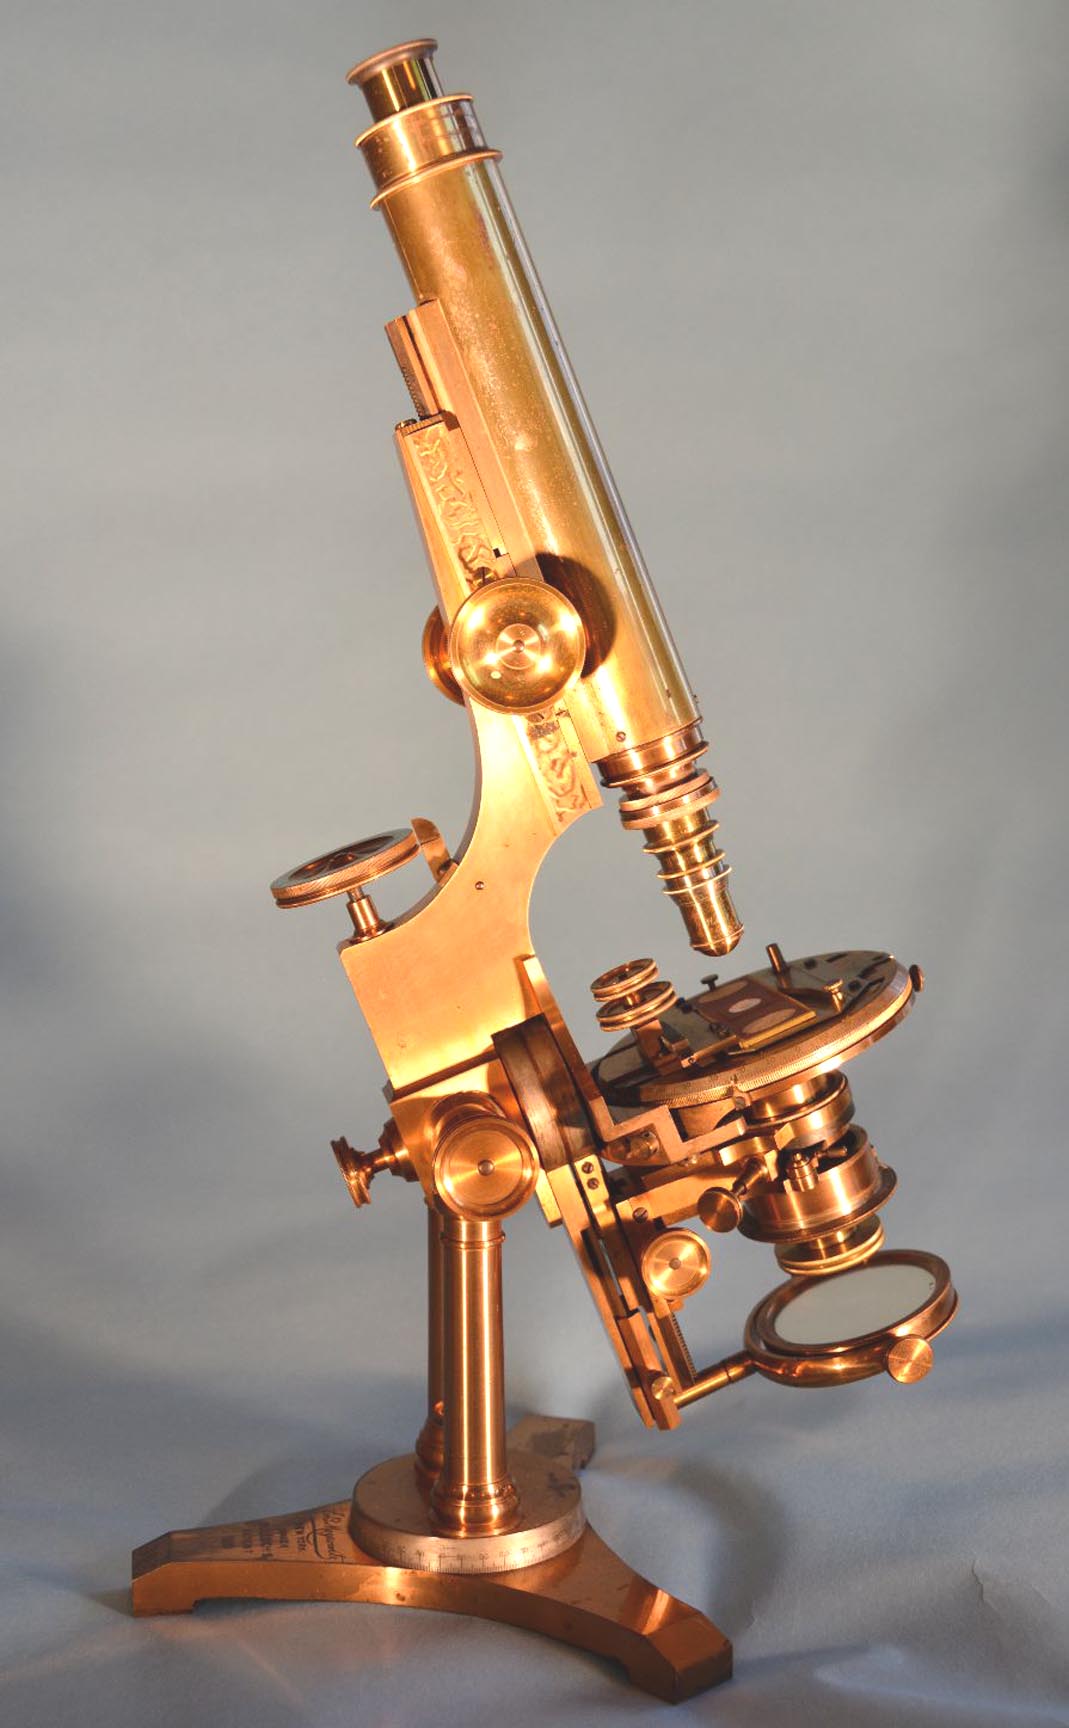 Bulloch Histological Microscope number 104